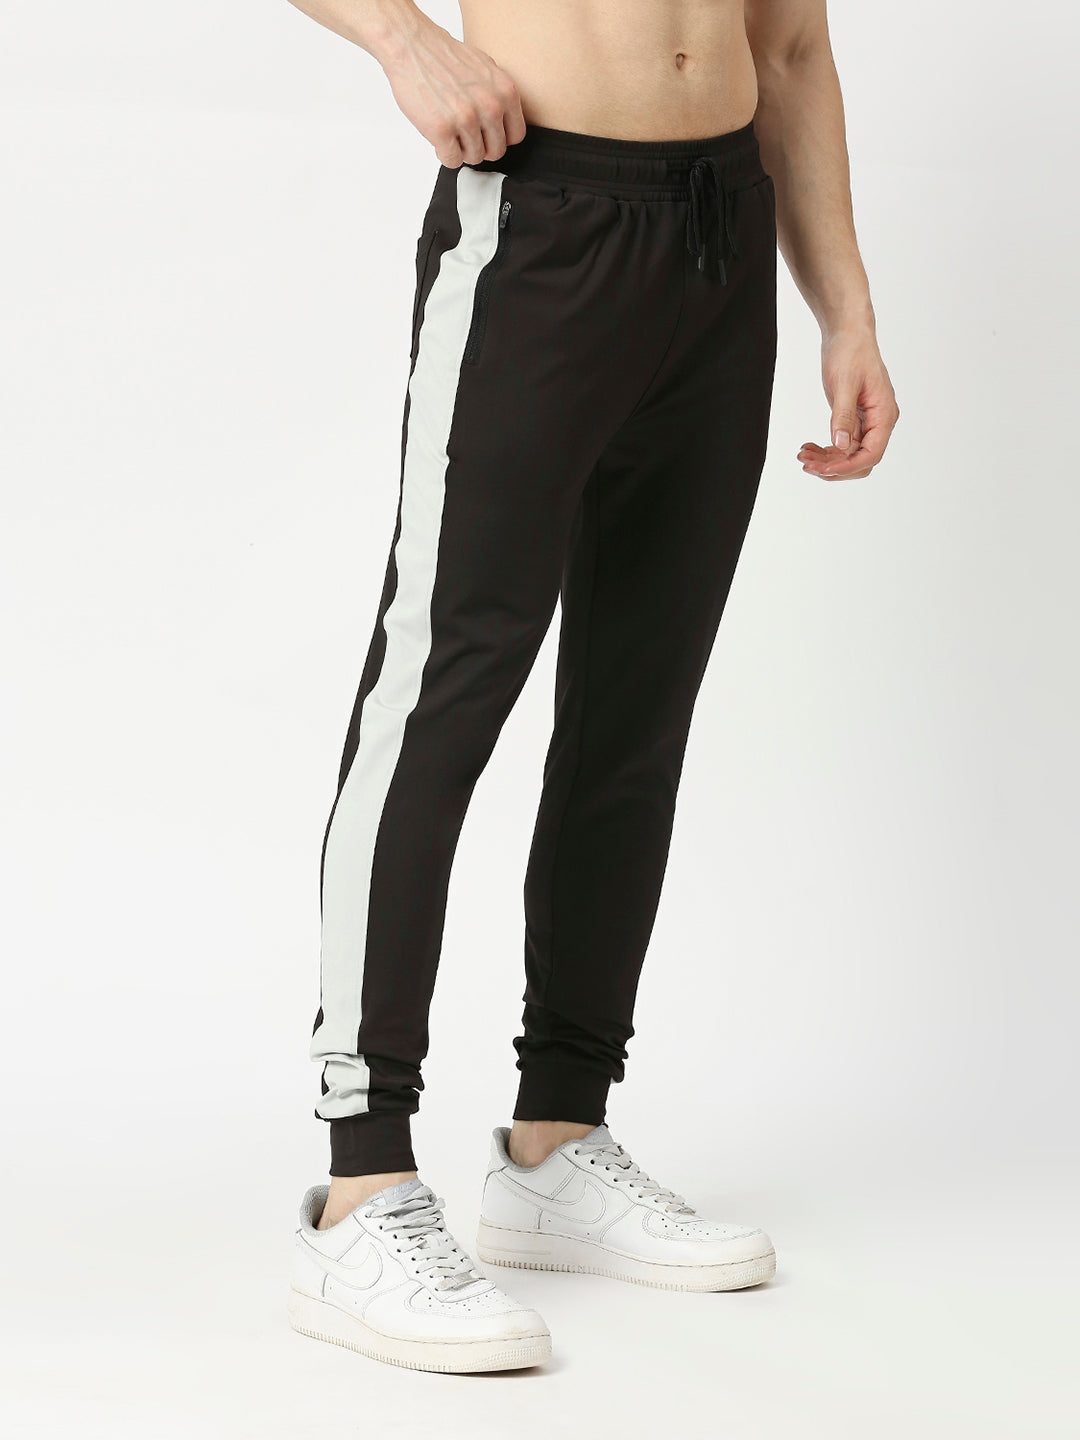 Adidas White Track Pants - Buy Adidas White Track Pants online in India